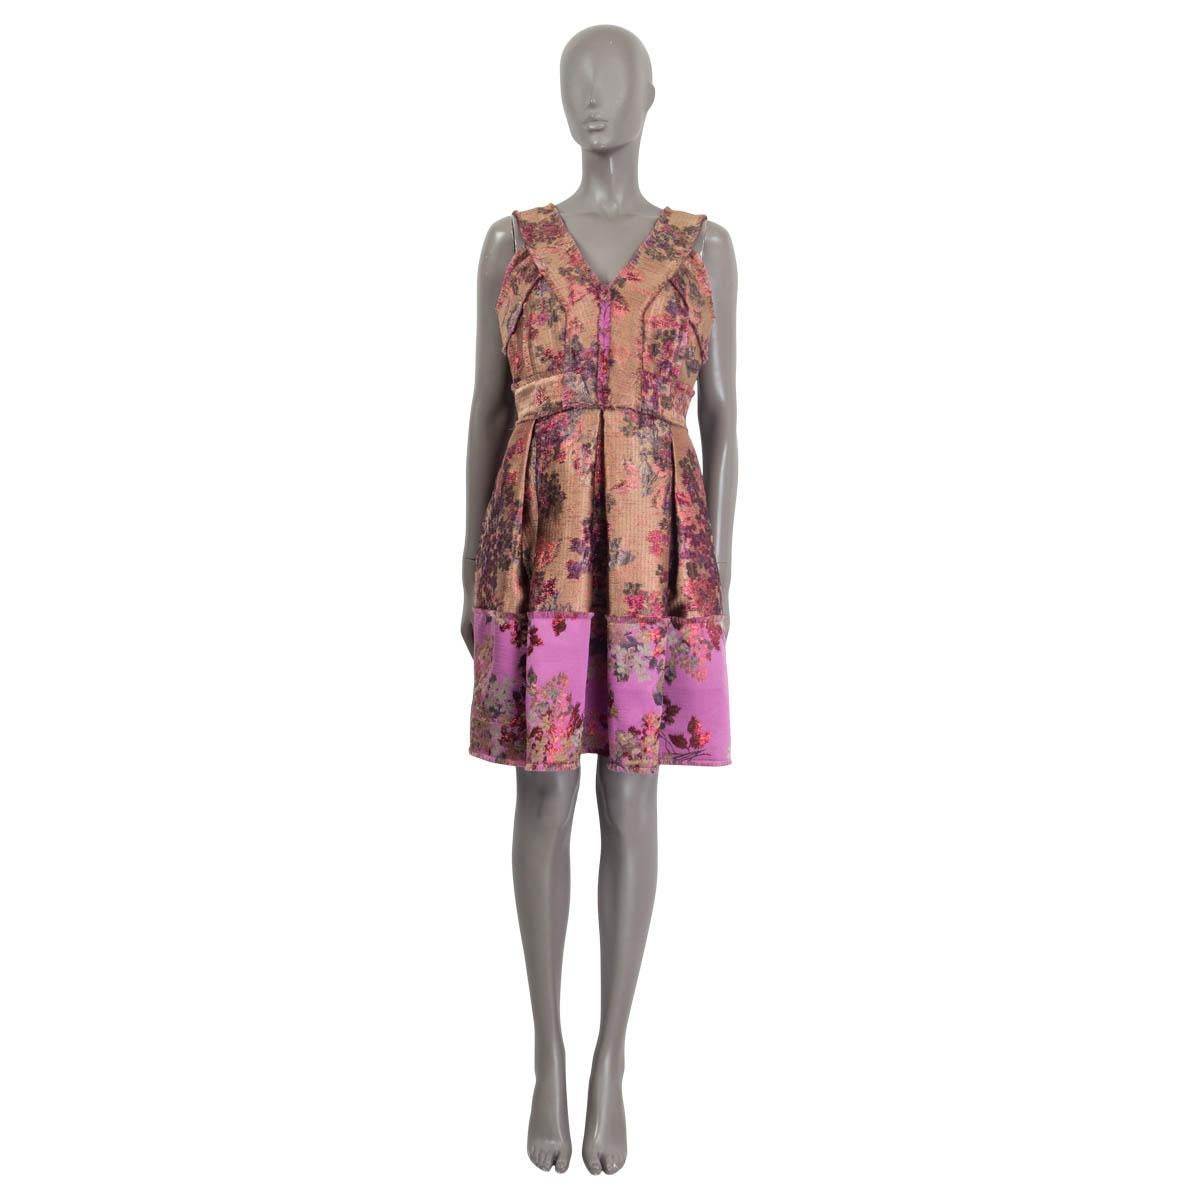 100% authentic Erdem 'Fabienne' cocktail dress in purple, beige and green jacquard (tag is missing). Fall/winter 2015 collection. Has two slit pockets. Embellished with pink lurex threads and tiny fringes all over the dress. Opens with a zipper on